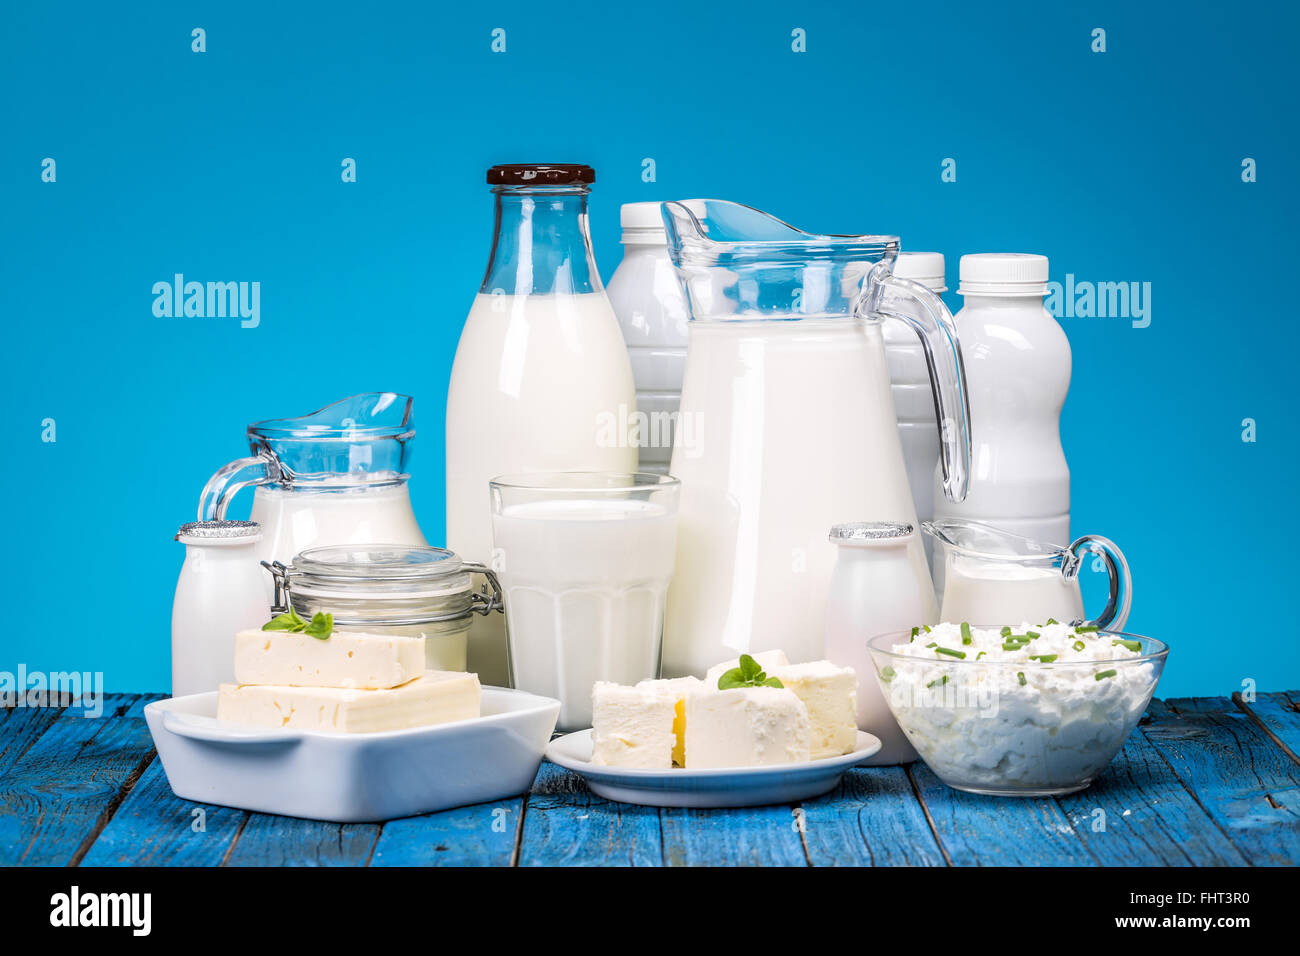 Dairy products on painted wooden table over blue background Stock Photo